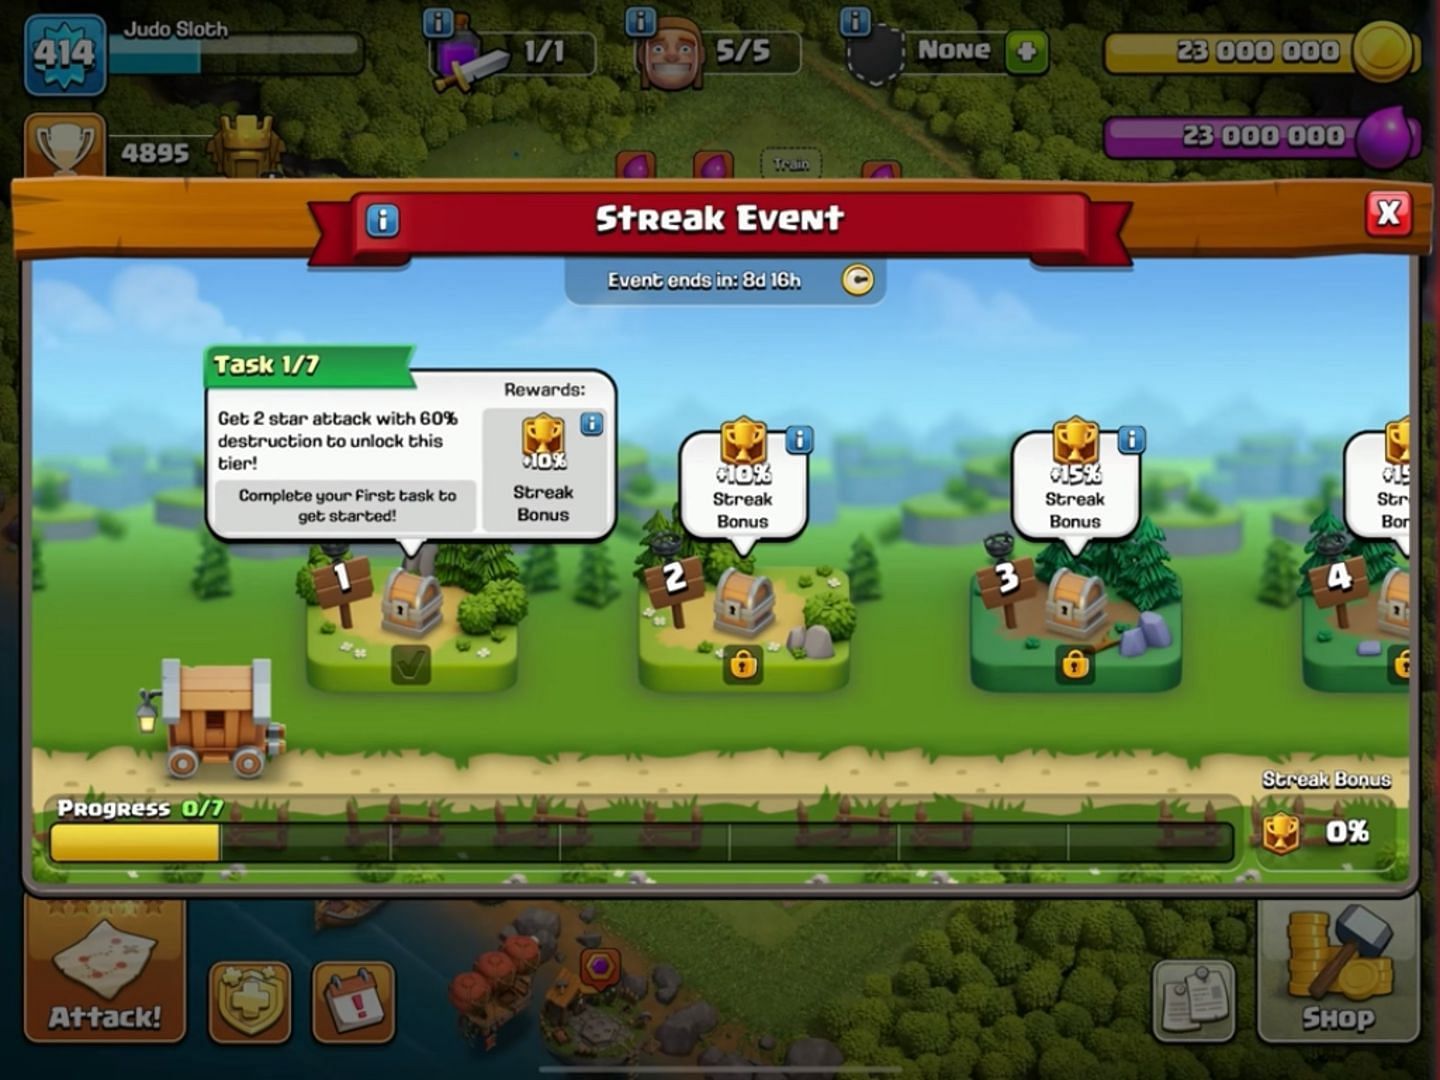 All the tasks featured in the ongoing event (Image via Supercell)